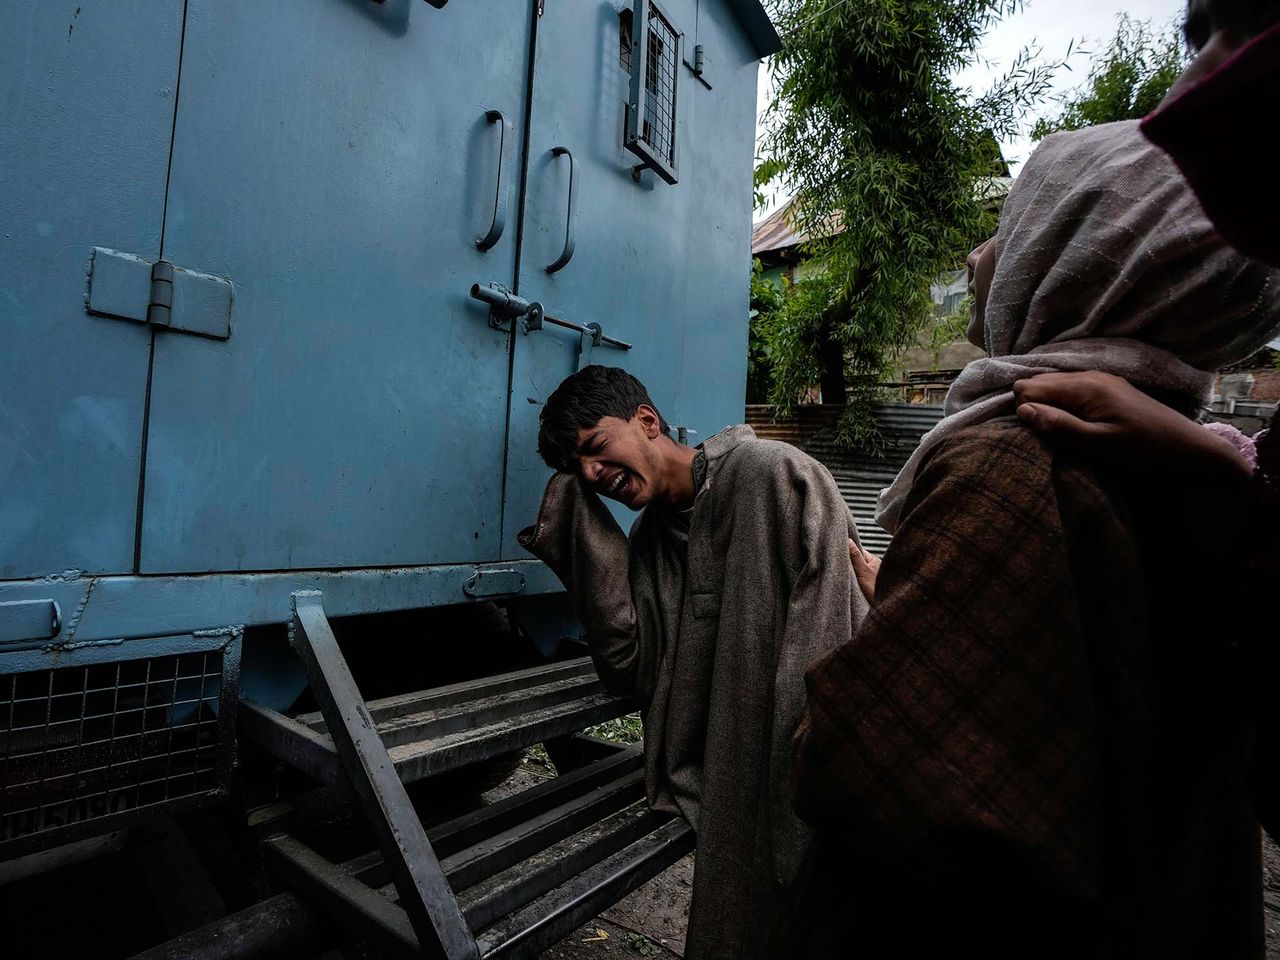 A Kashmiri boy cry as their house damaged during a gun-battle in Malwah village, north of Srinagar, Indian controlled Kashmir, Thursday, April. 21, 2022. Two suspected rebels were killed and four soldiers and a policeman were injured during ongoing gun-battle in north Kashmir on Thursday police said. This project documents ongoing unrest in the long-disputed region of Kashmir, dating back to 1947, when India and Pakistan gained independence  from Britain. Both nations claim Kashmir in its entirety, and each administers a portion of the region. In Indian- administered Kashmir, rebels have been fighting Indian rule for decades, seeking to unite the territory, either  under Pakistani rule or as an independent country. India says that Pakistan supports armed insurgency in Kashmir. Pakistan denies the charge, saying it provides moral and diplomatic support only.